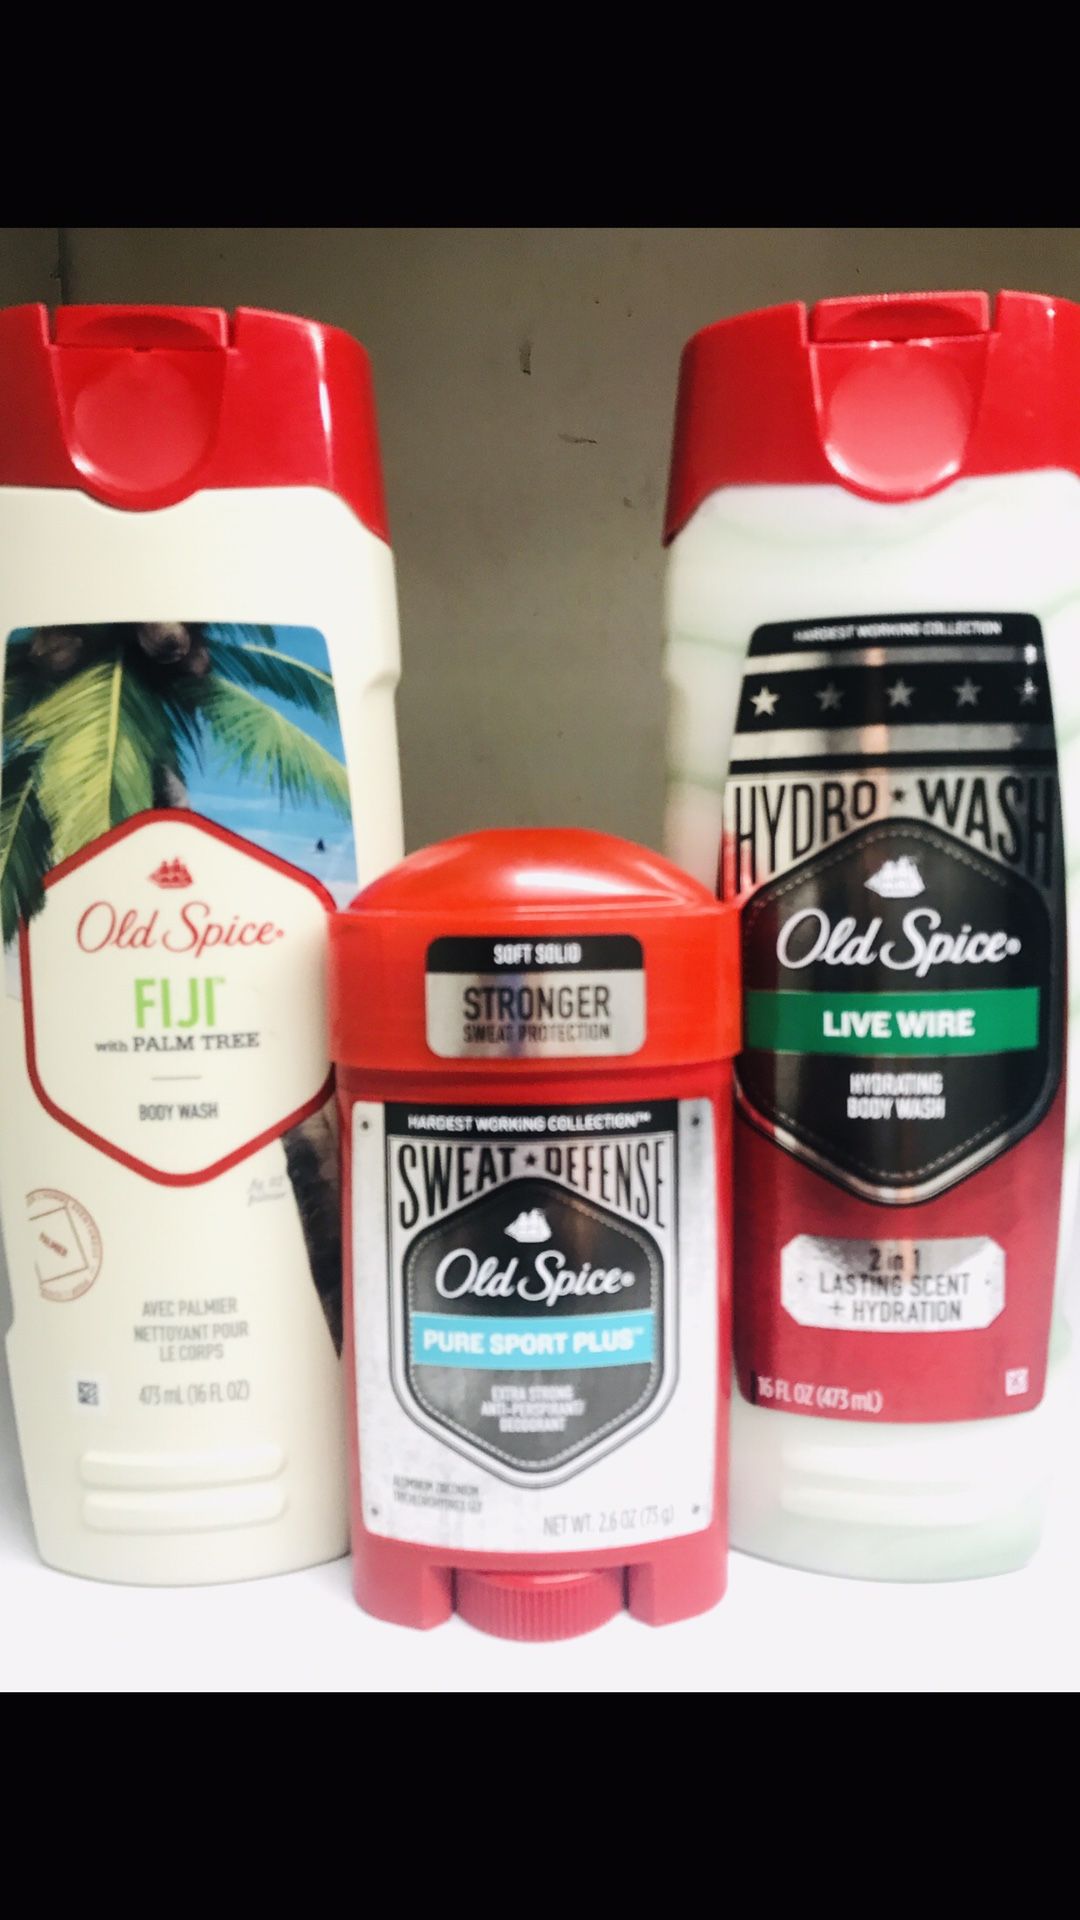 OLD SPICE BODY WASHES AND DEODORANT